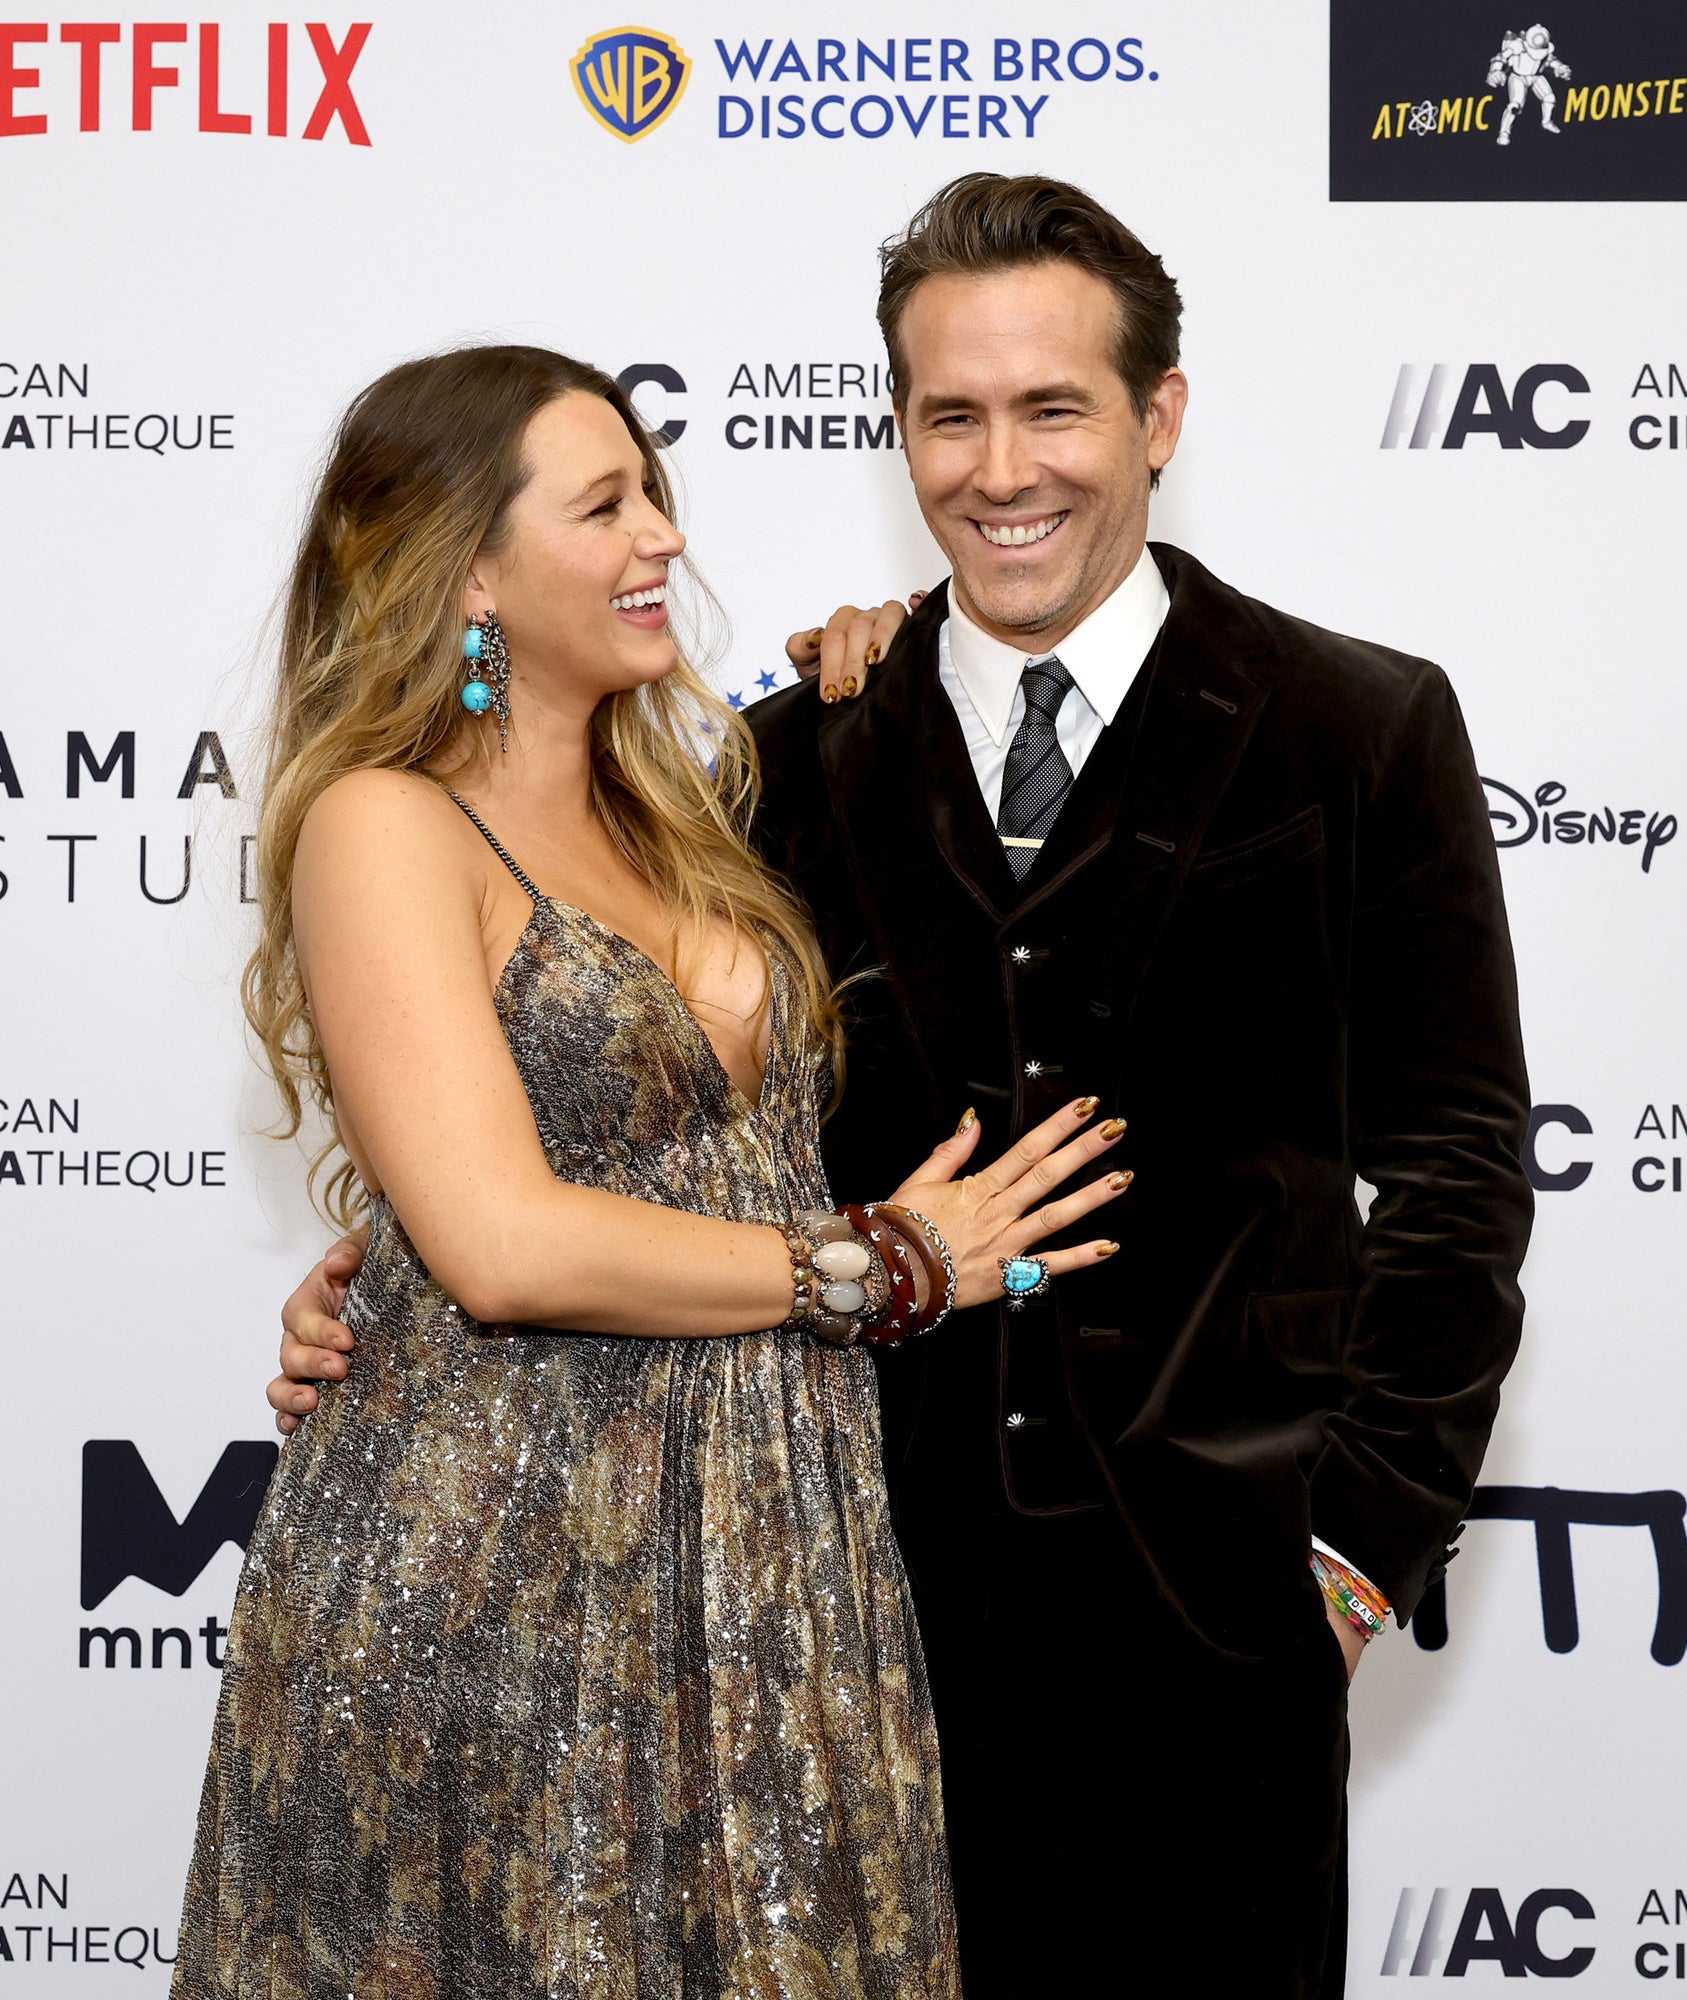 Blake Lively Baby #4 Name: What Is Her Daughter With Ryan Reynolds Called?